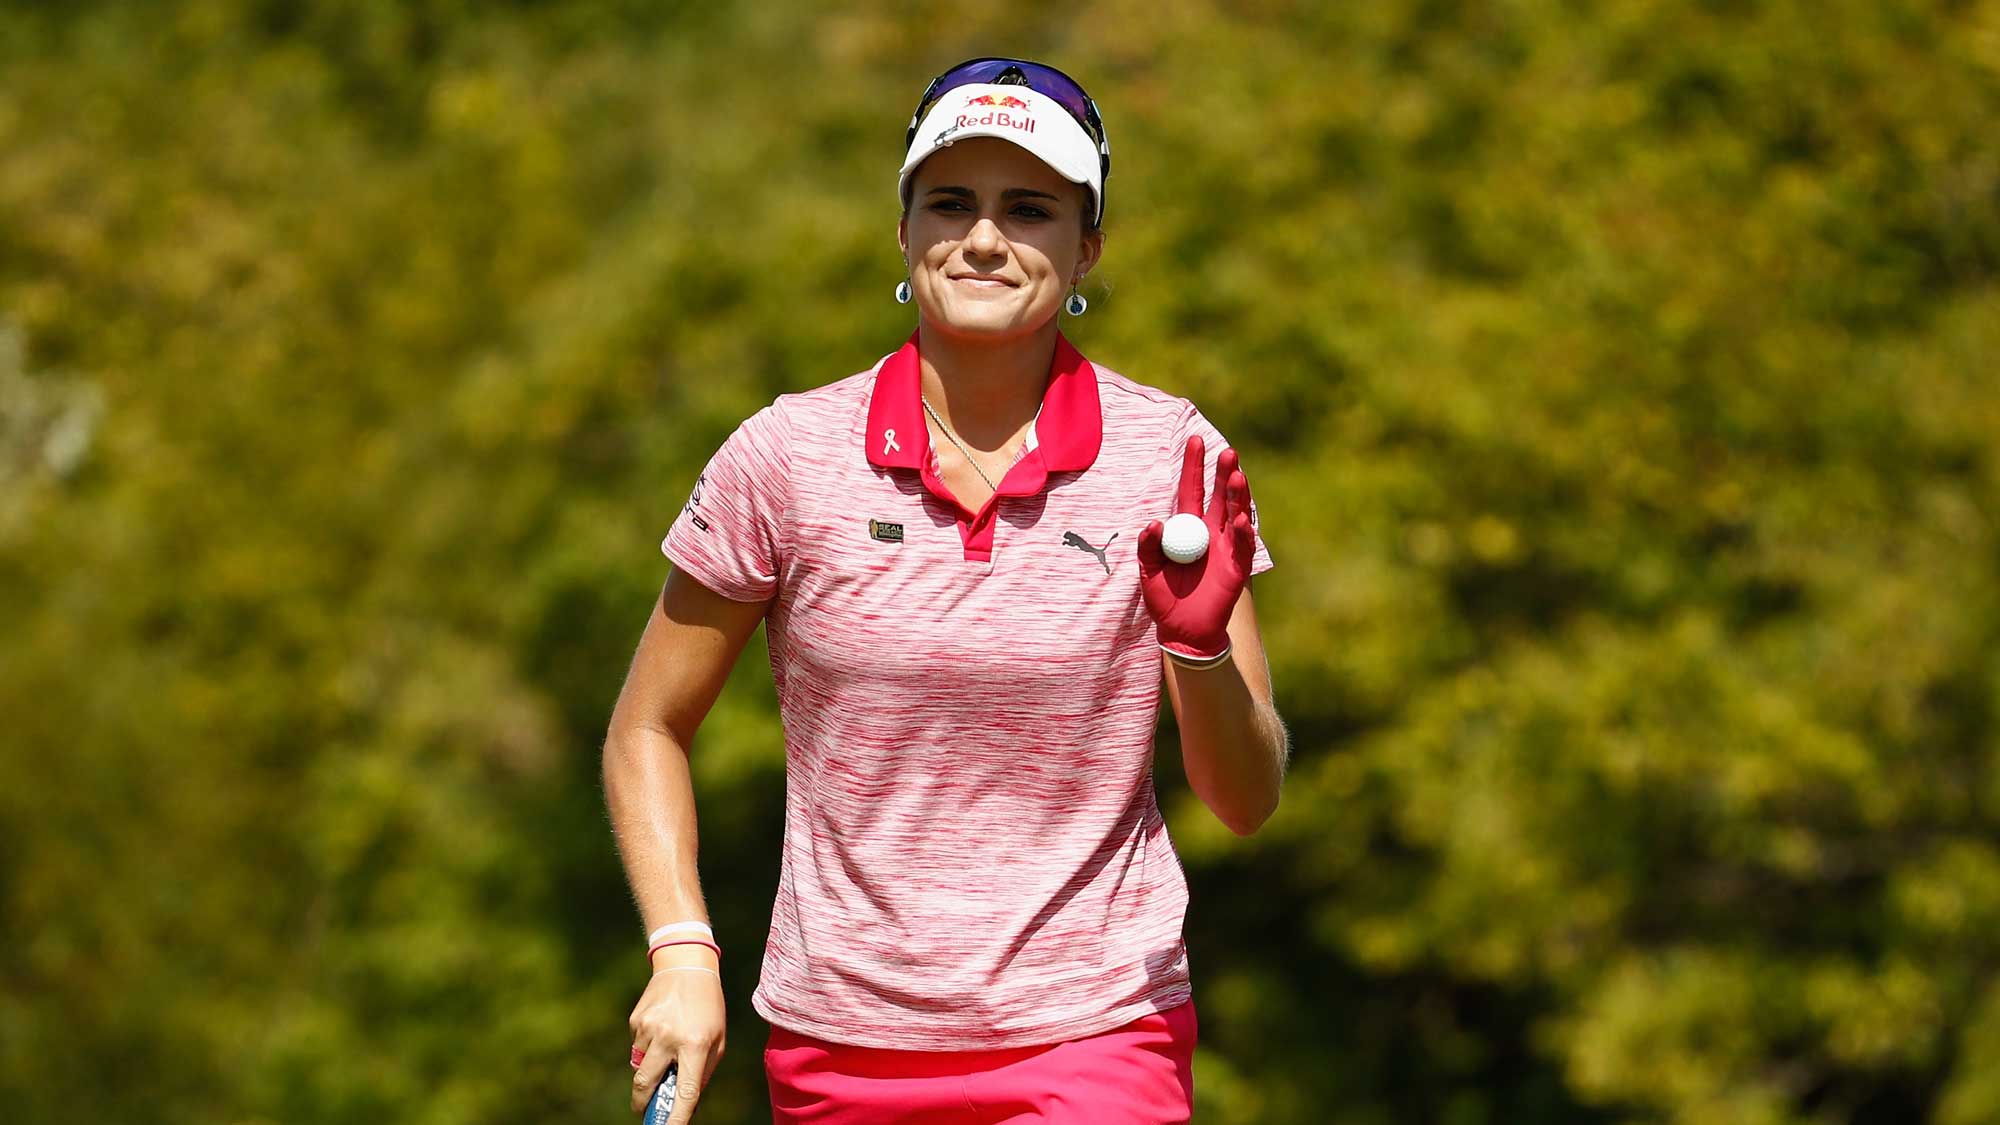 Lexi Thompson waves to the crowd after making a birdie on the 5th hole during the second round of the Indy Women In Tech Championship-Presented By Guggenheim